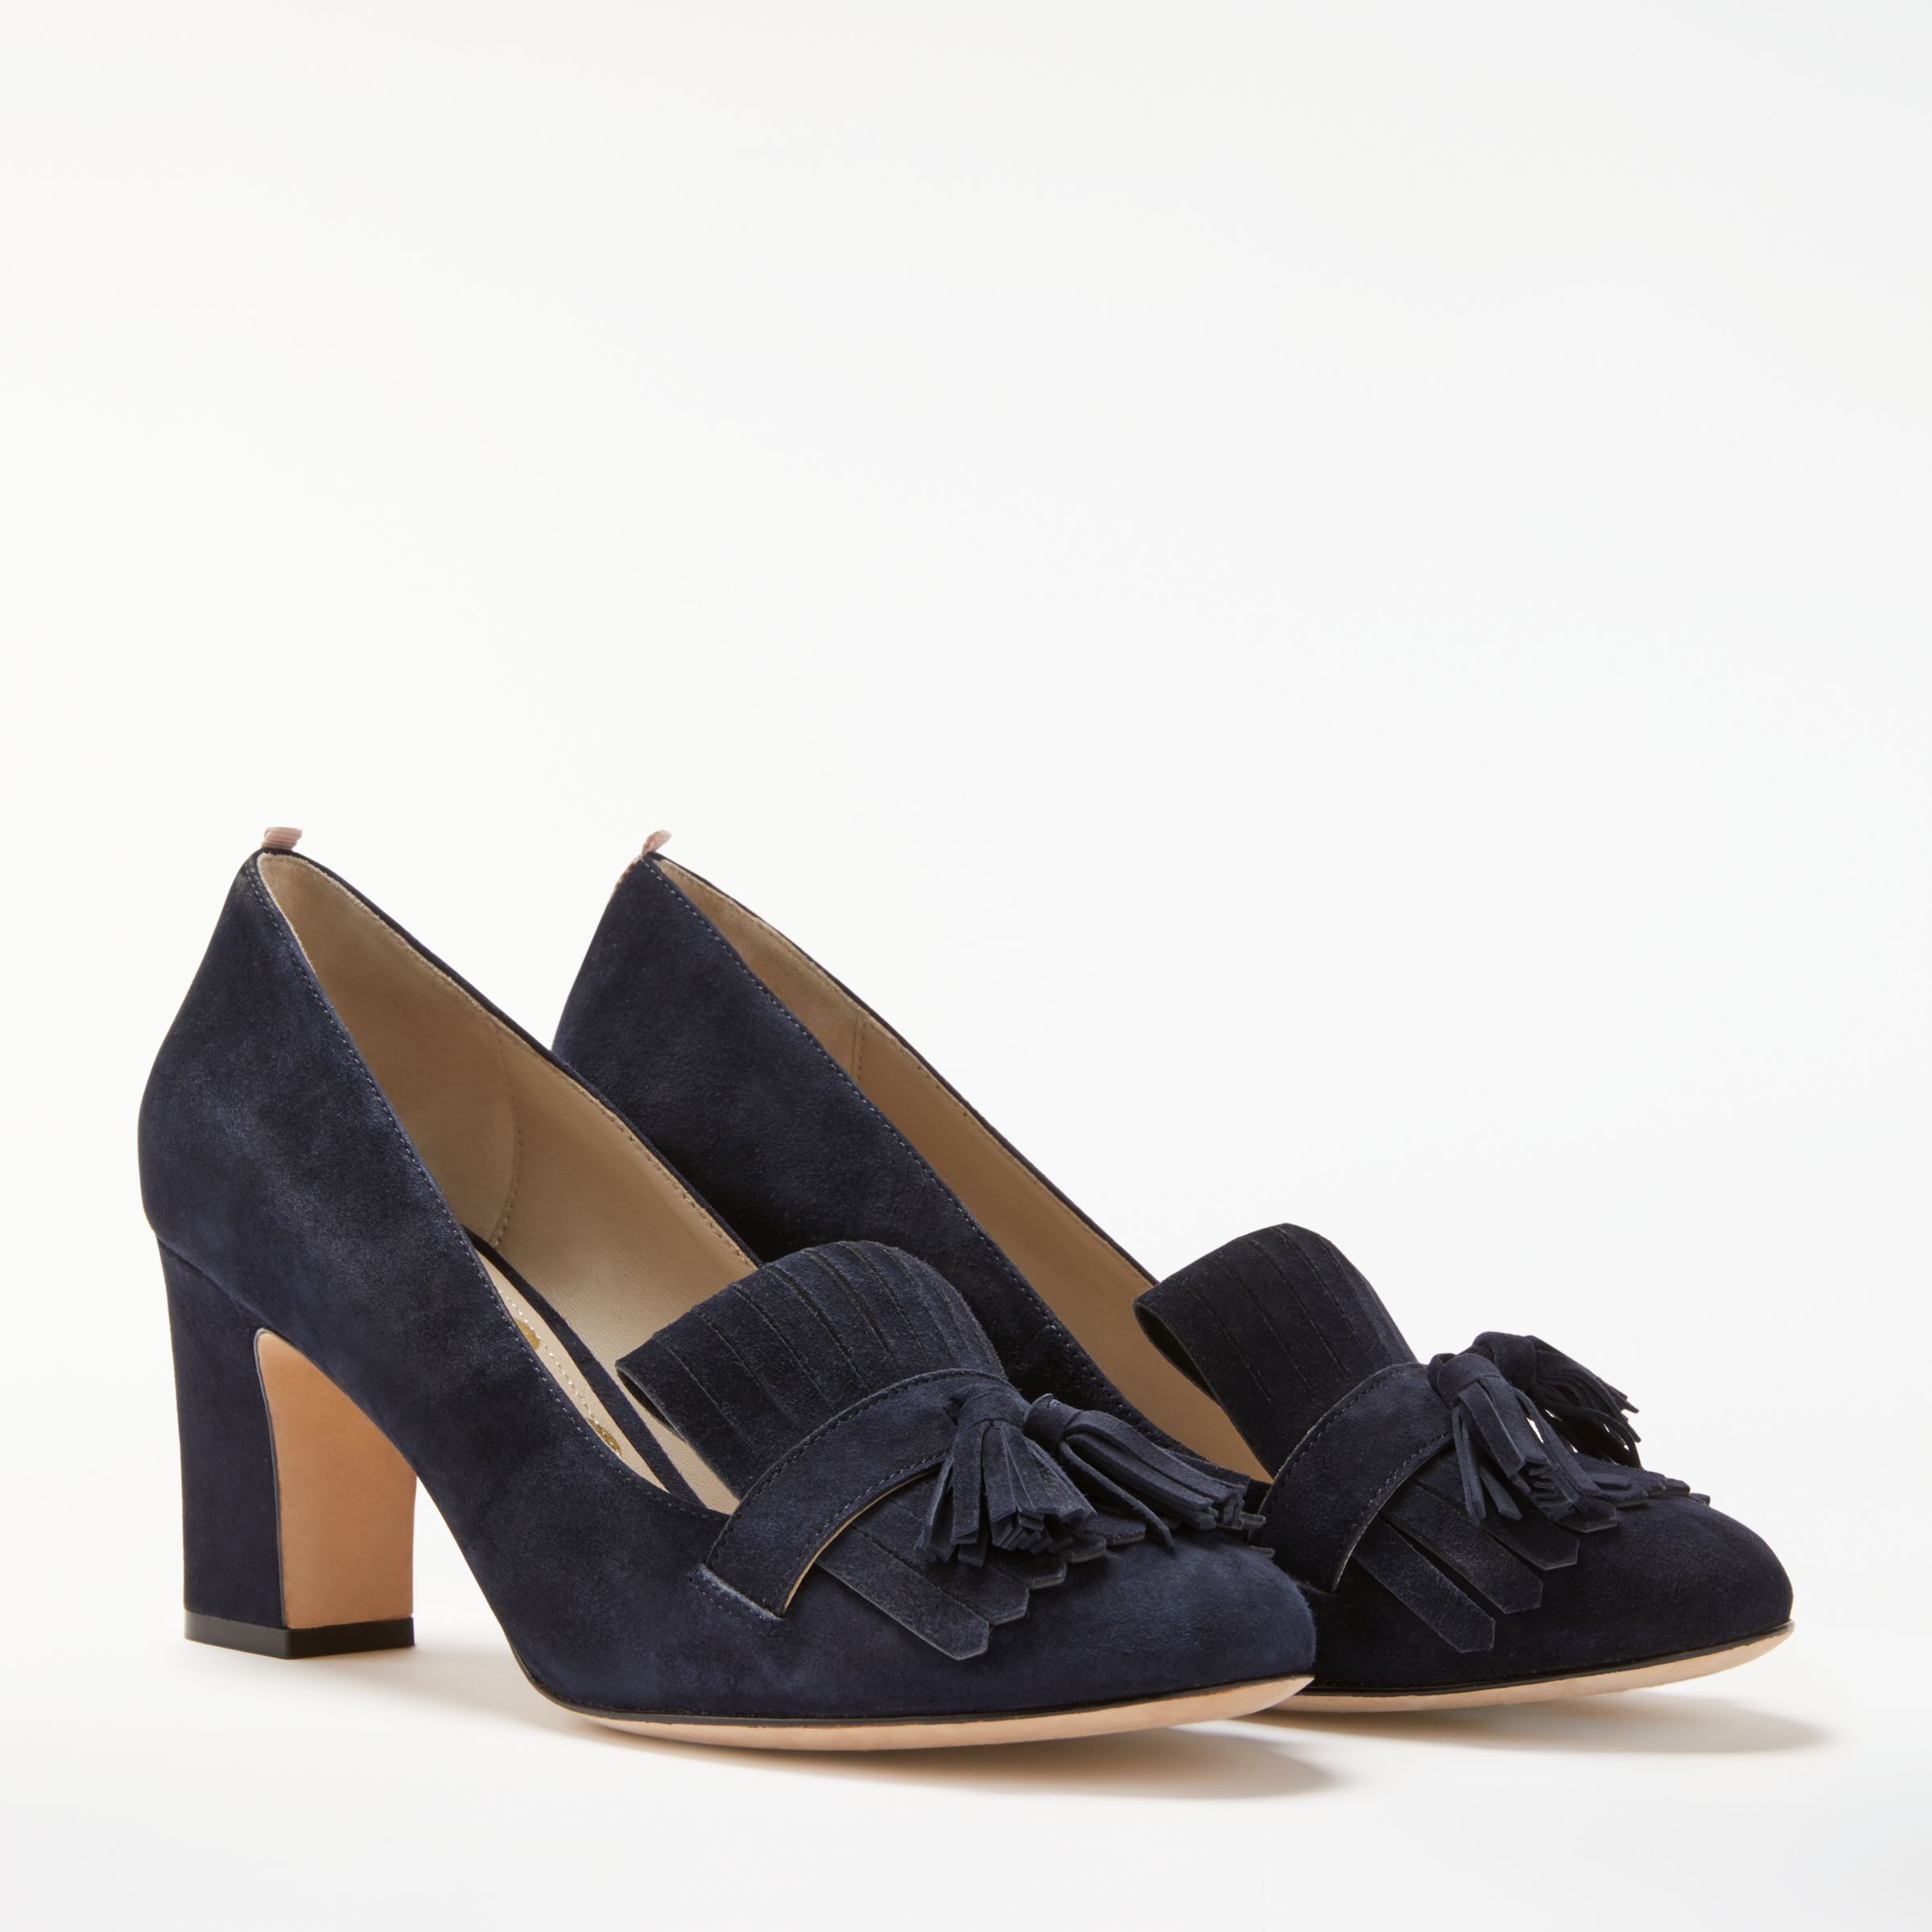 Boden Pippa Block Heeled Loafer Court Shoes, Navy Suede at John Lewis ...